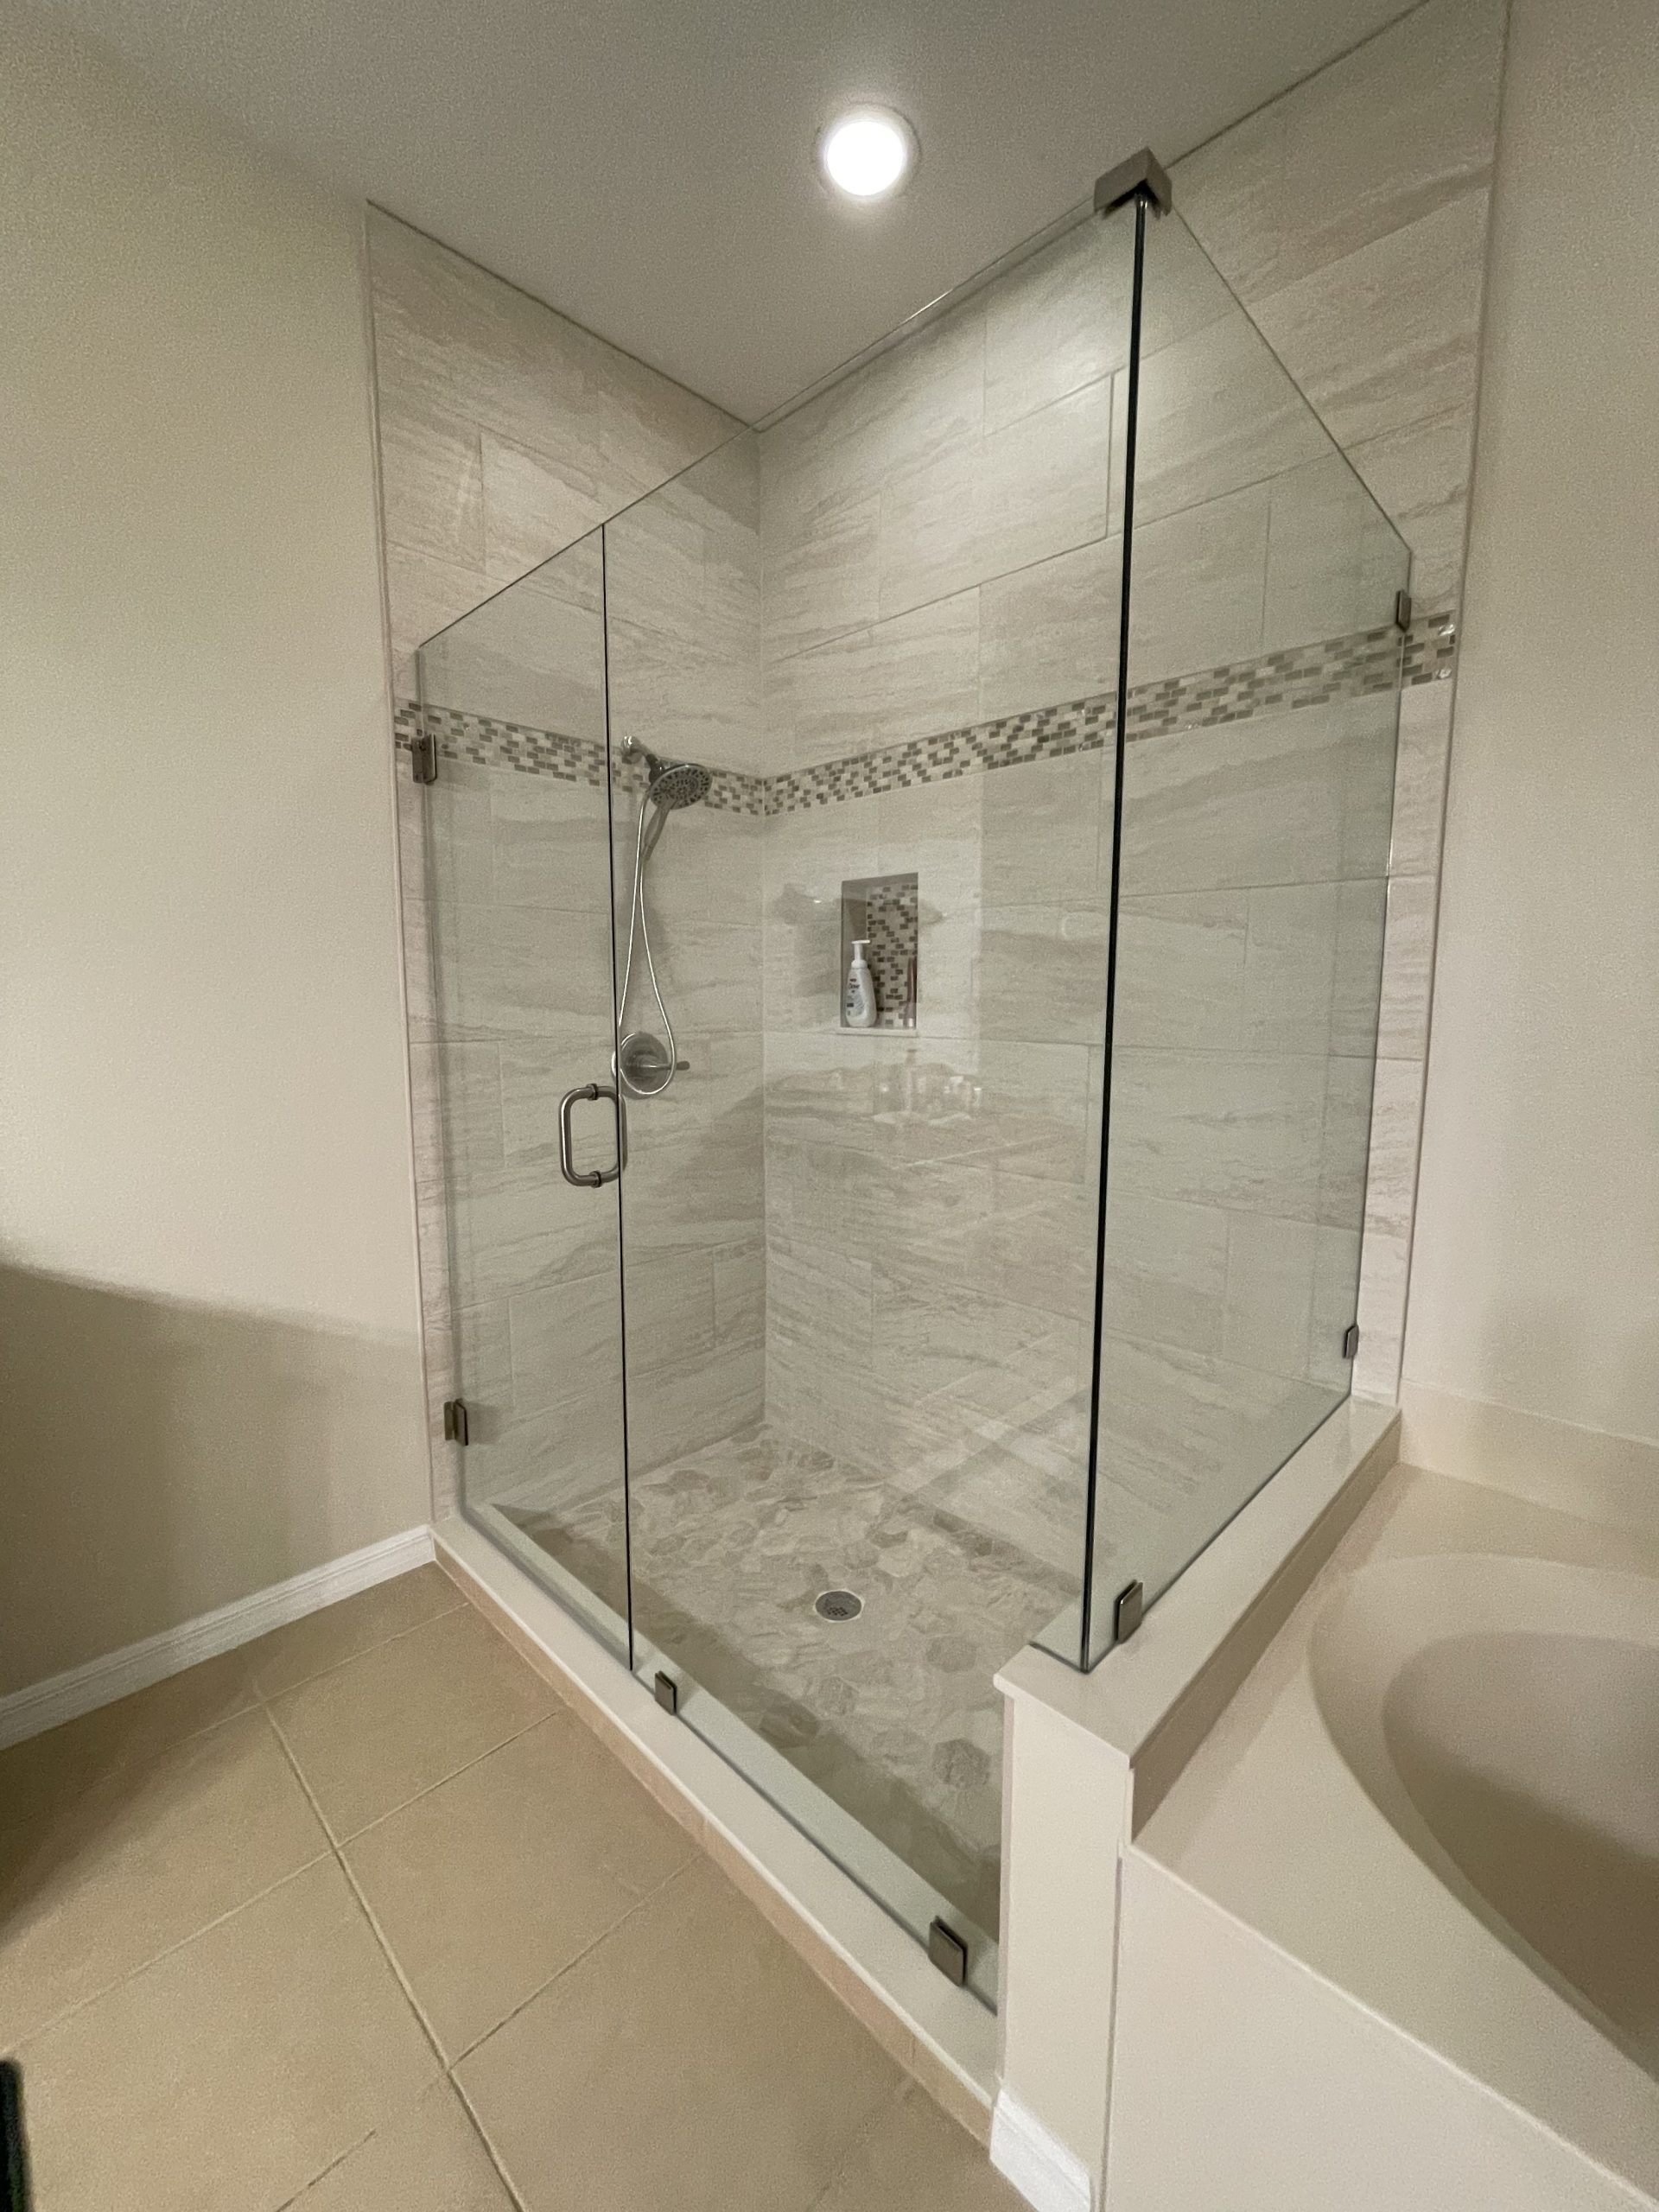 Shower Enclosure of the Day!